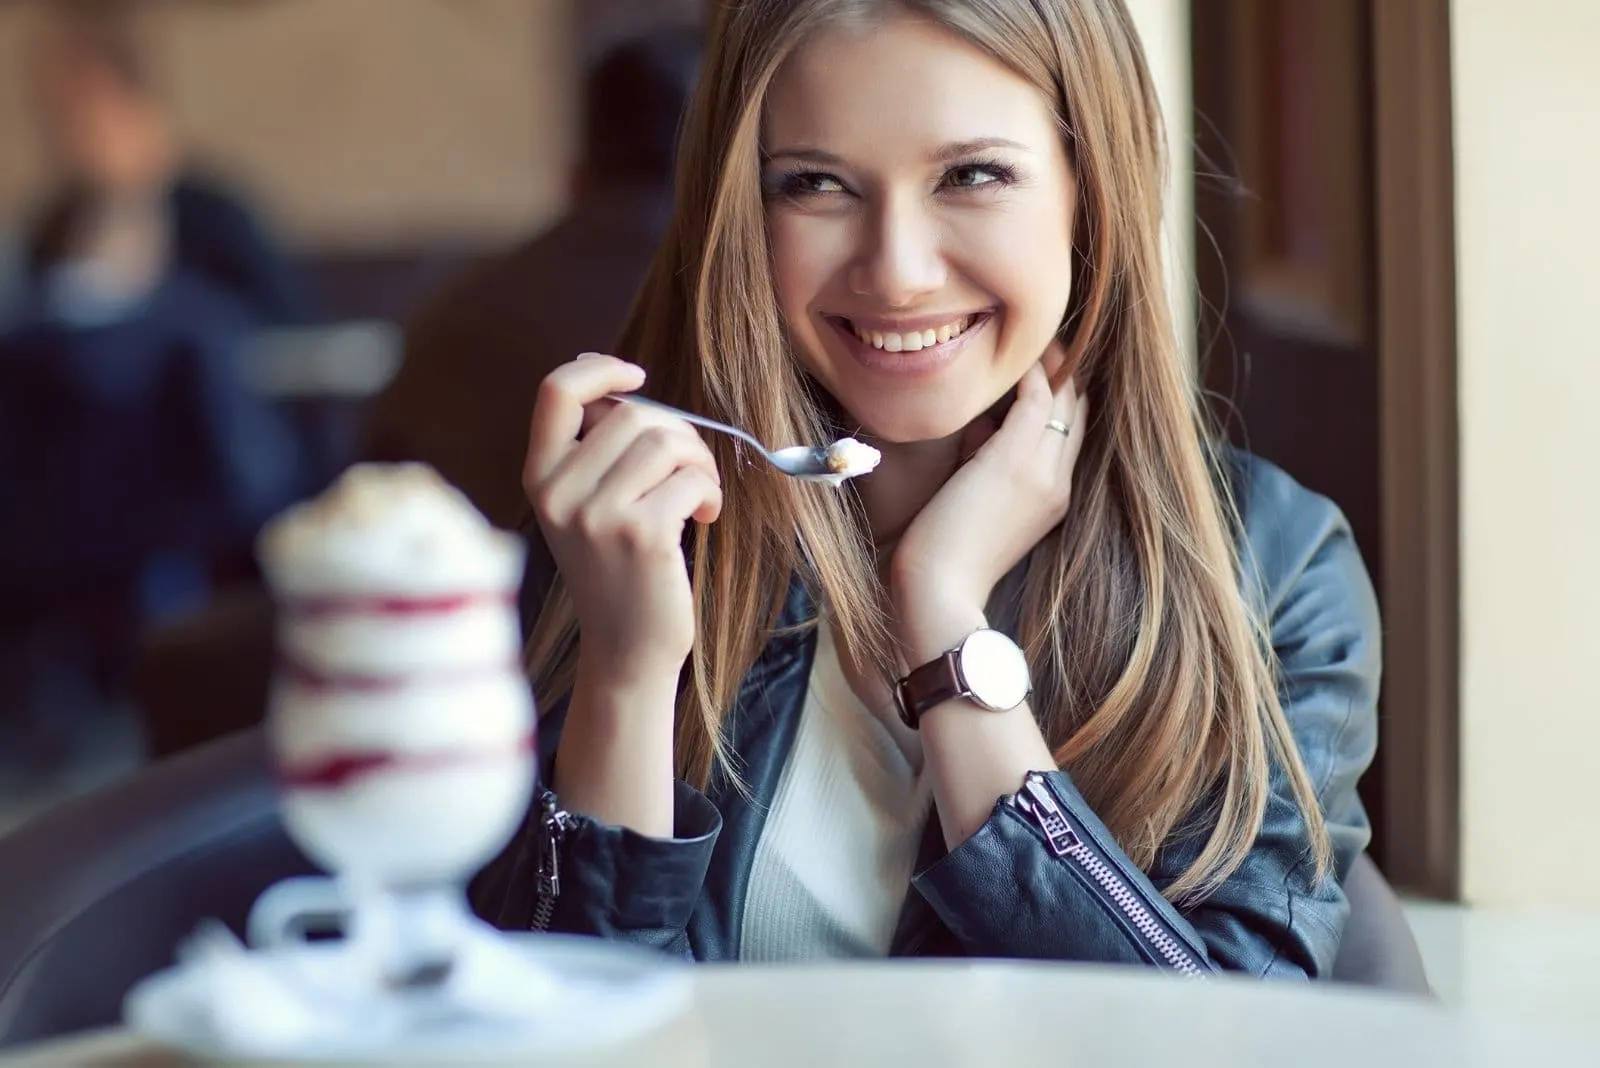 woman eating ice cream and smiling while looking at somebody and holding her hair